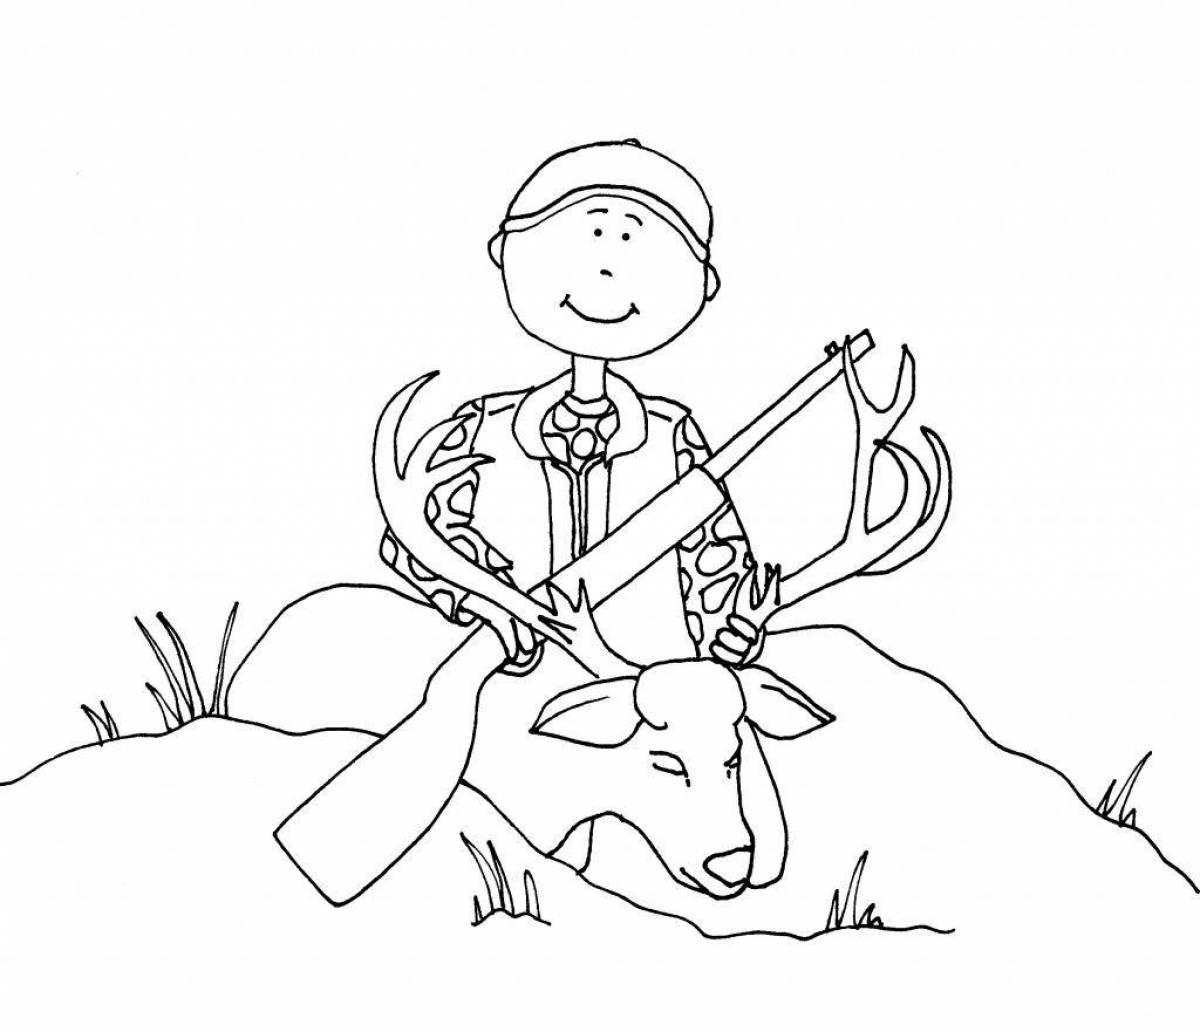 Happy hunters and rabbits coloring page